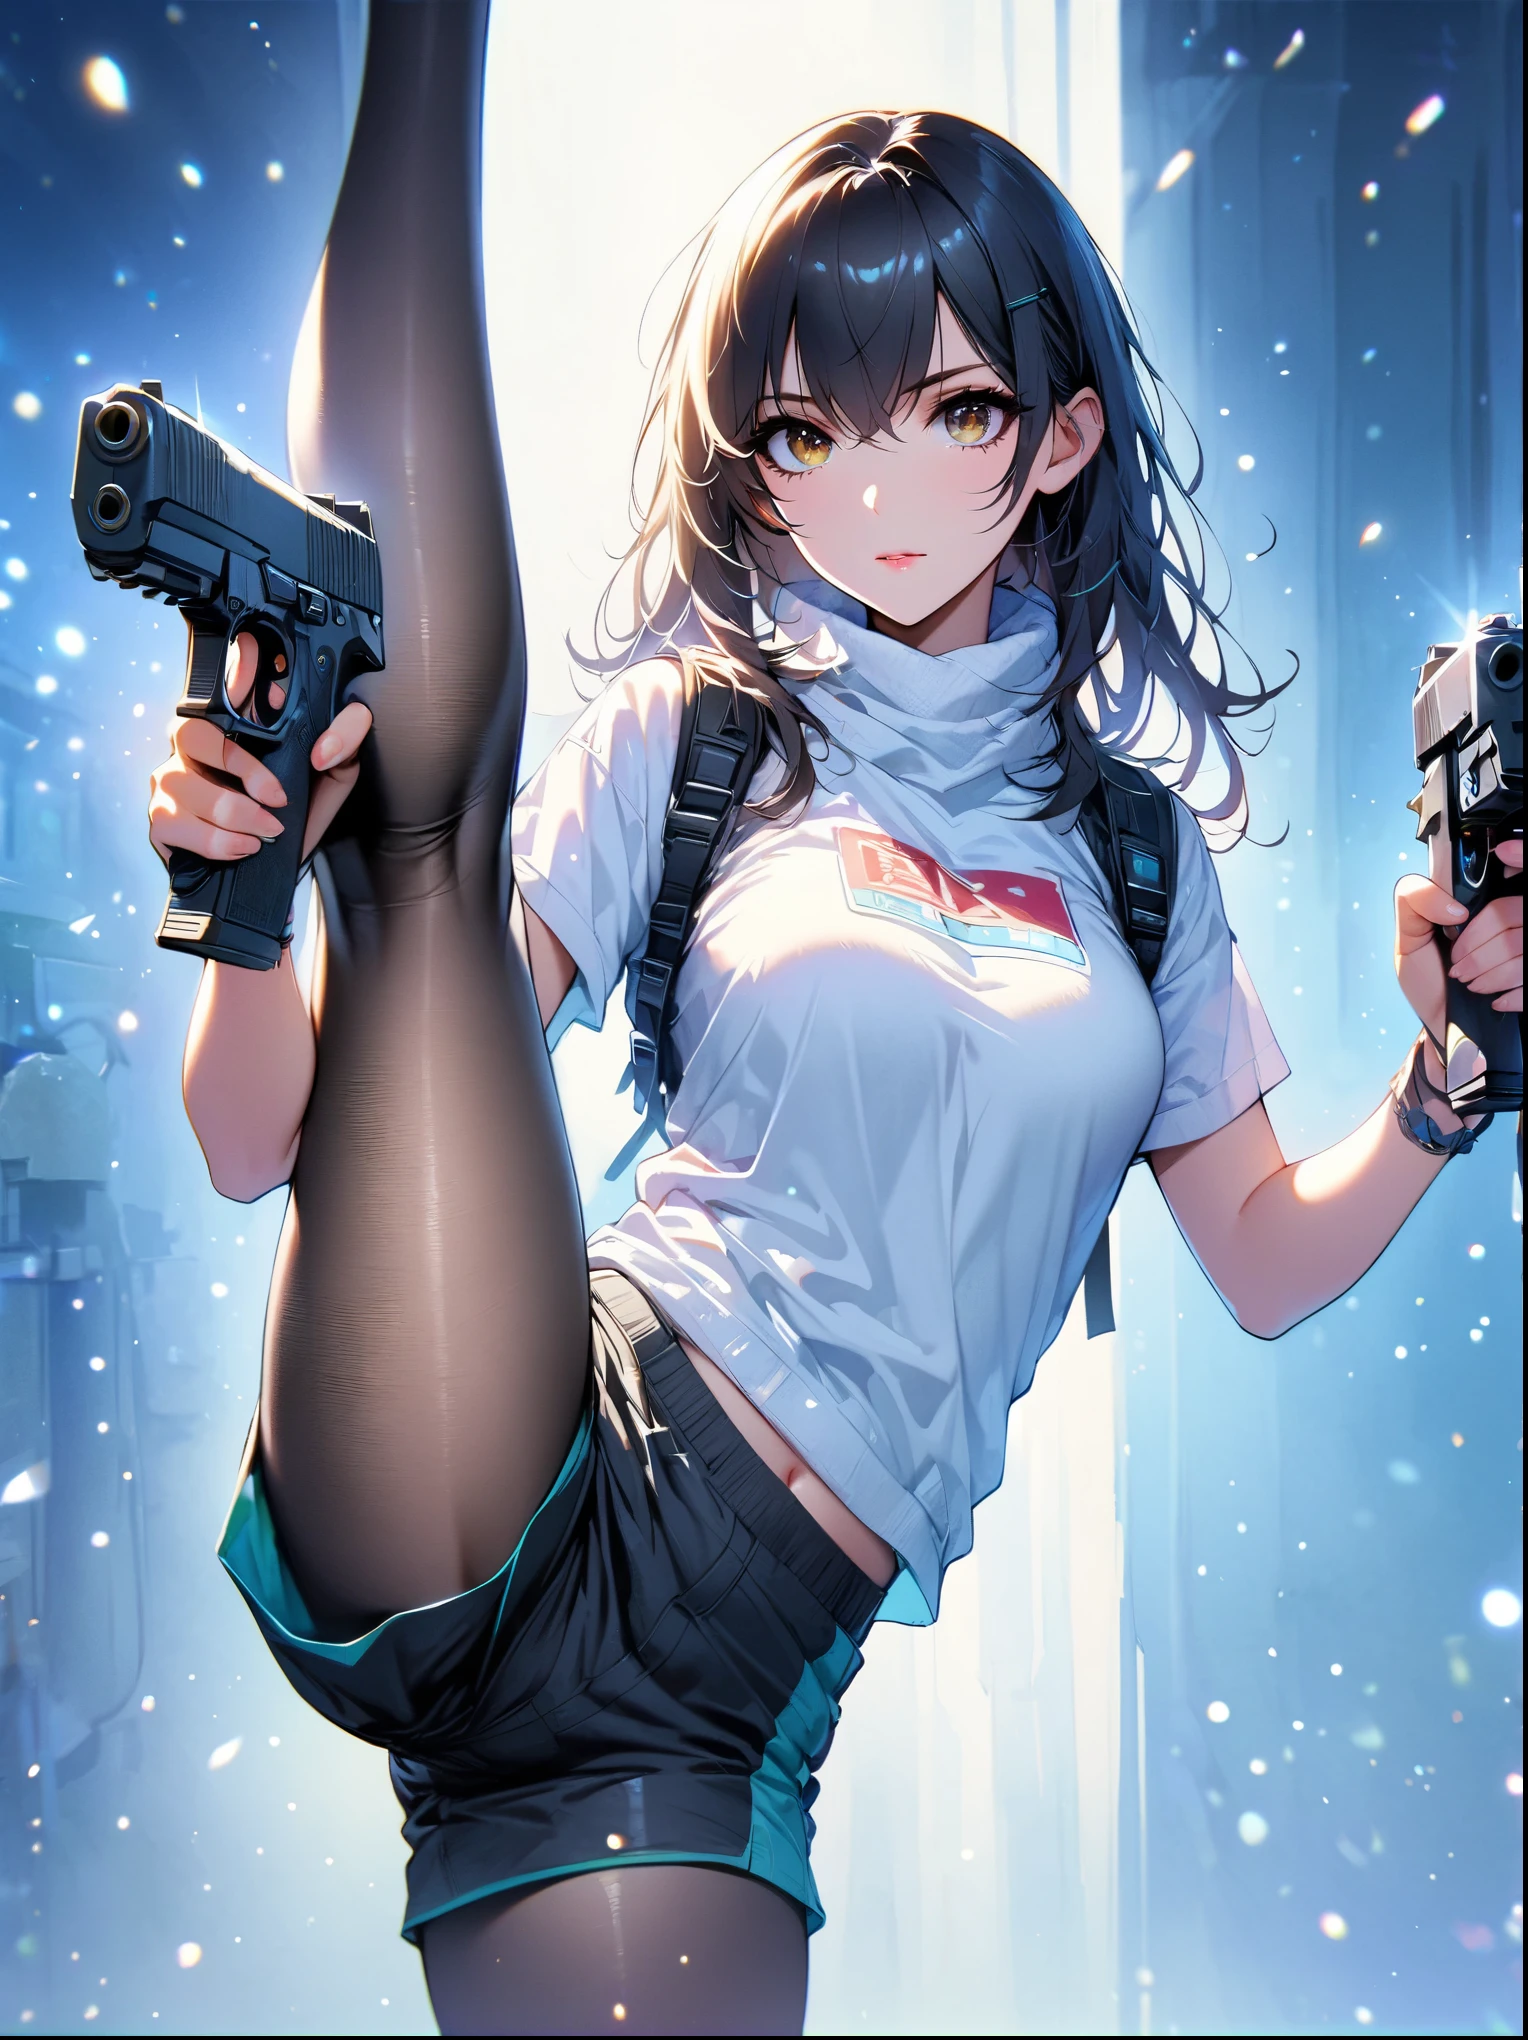 (best quality:1.2), 1 girl, standing_split, long black hair, white turtleneck sweater, sports Shorts, pantyhose, Beautiful and delicate eyes, Beautiful and delicate lips, Extremely detailed eyes and face, long eyelashes, bright colors, professional, Super detailed, actual, studio lighting, Physically based rendering，holding gun with both hands，Aim at you